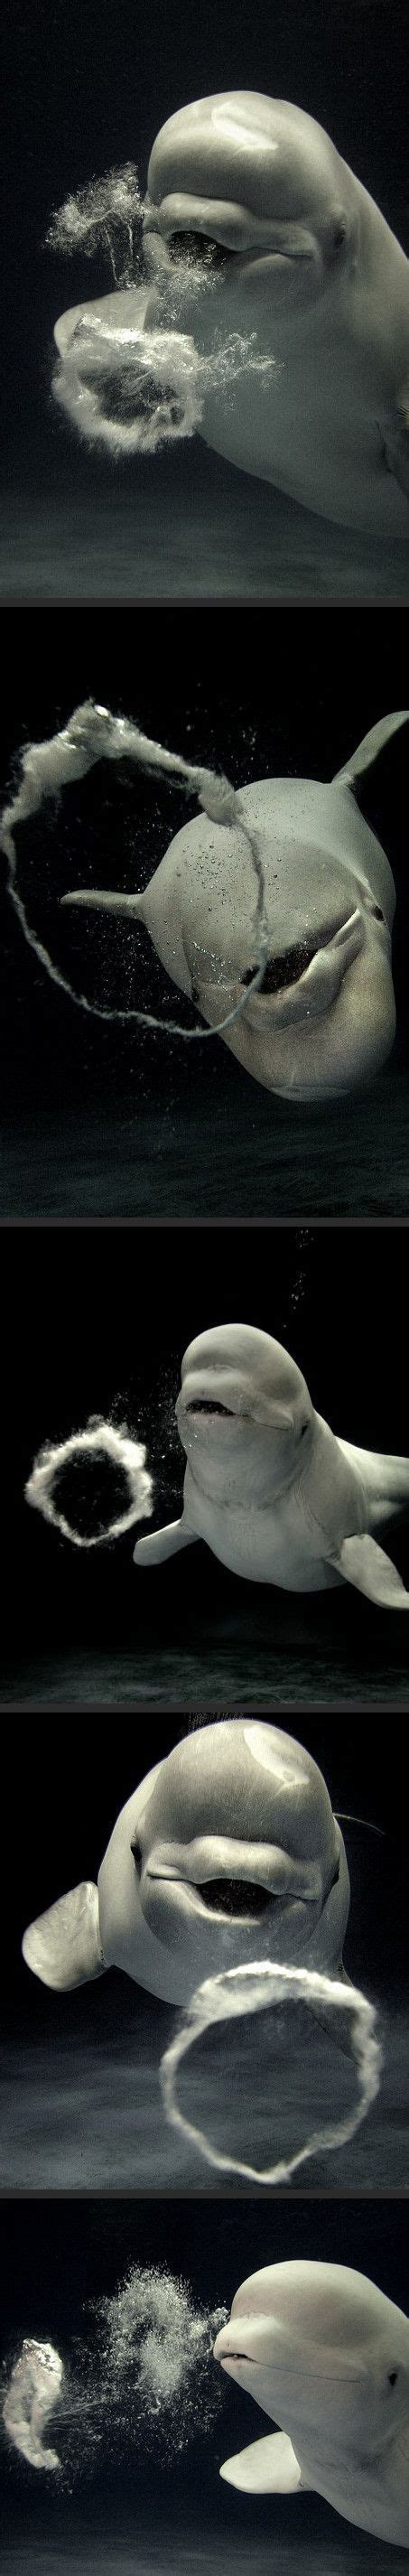 Lovely Bubbly Beluga Whales Are The Oceans Cleverest Creatures But